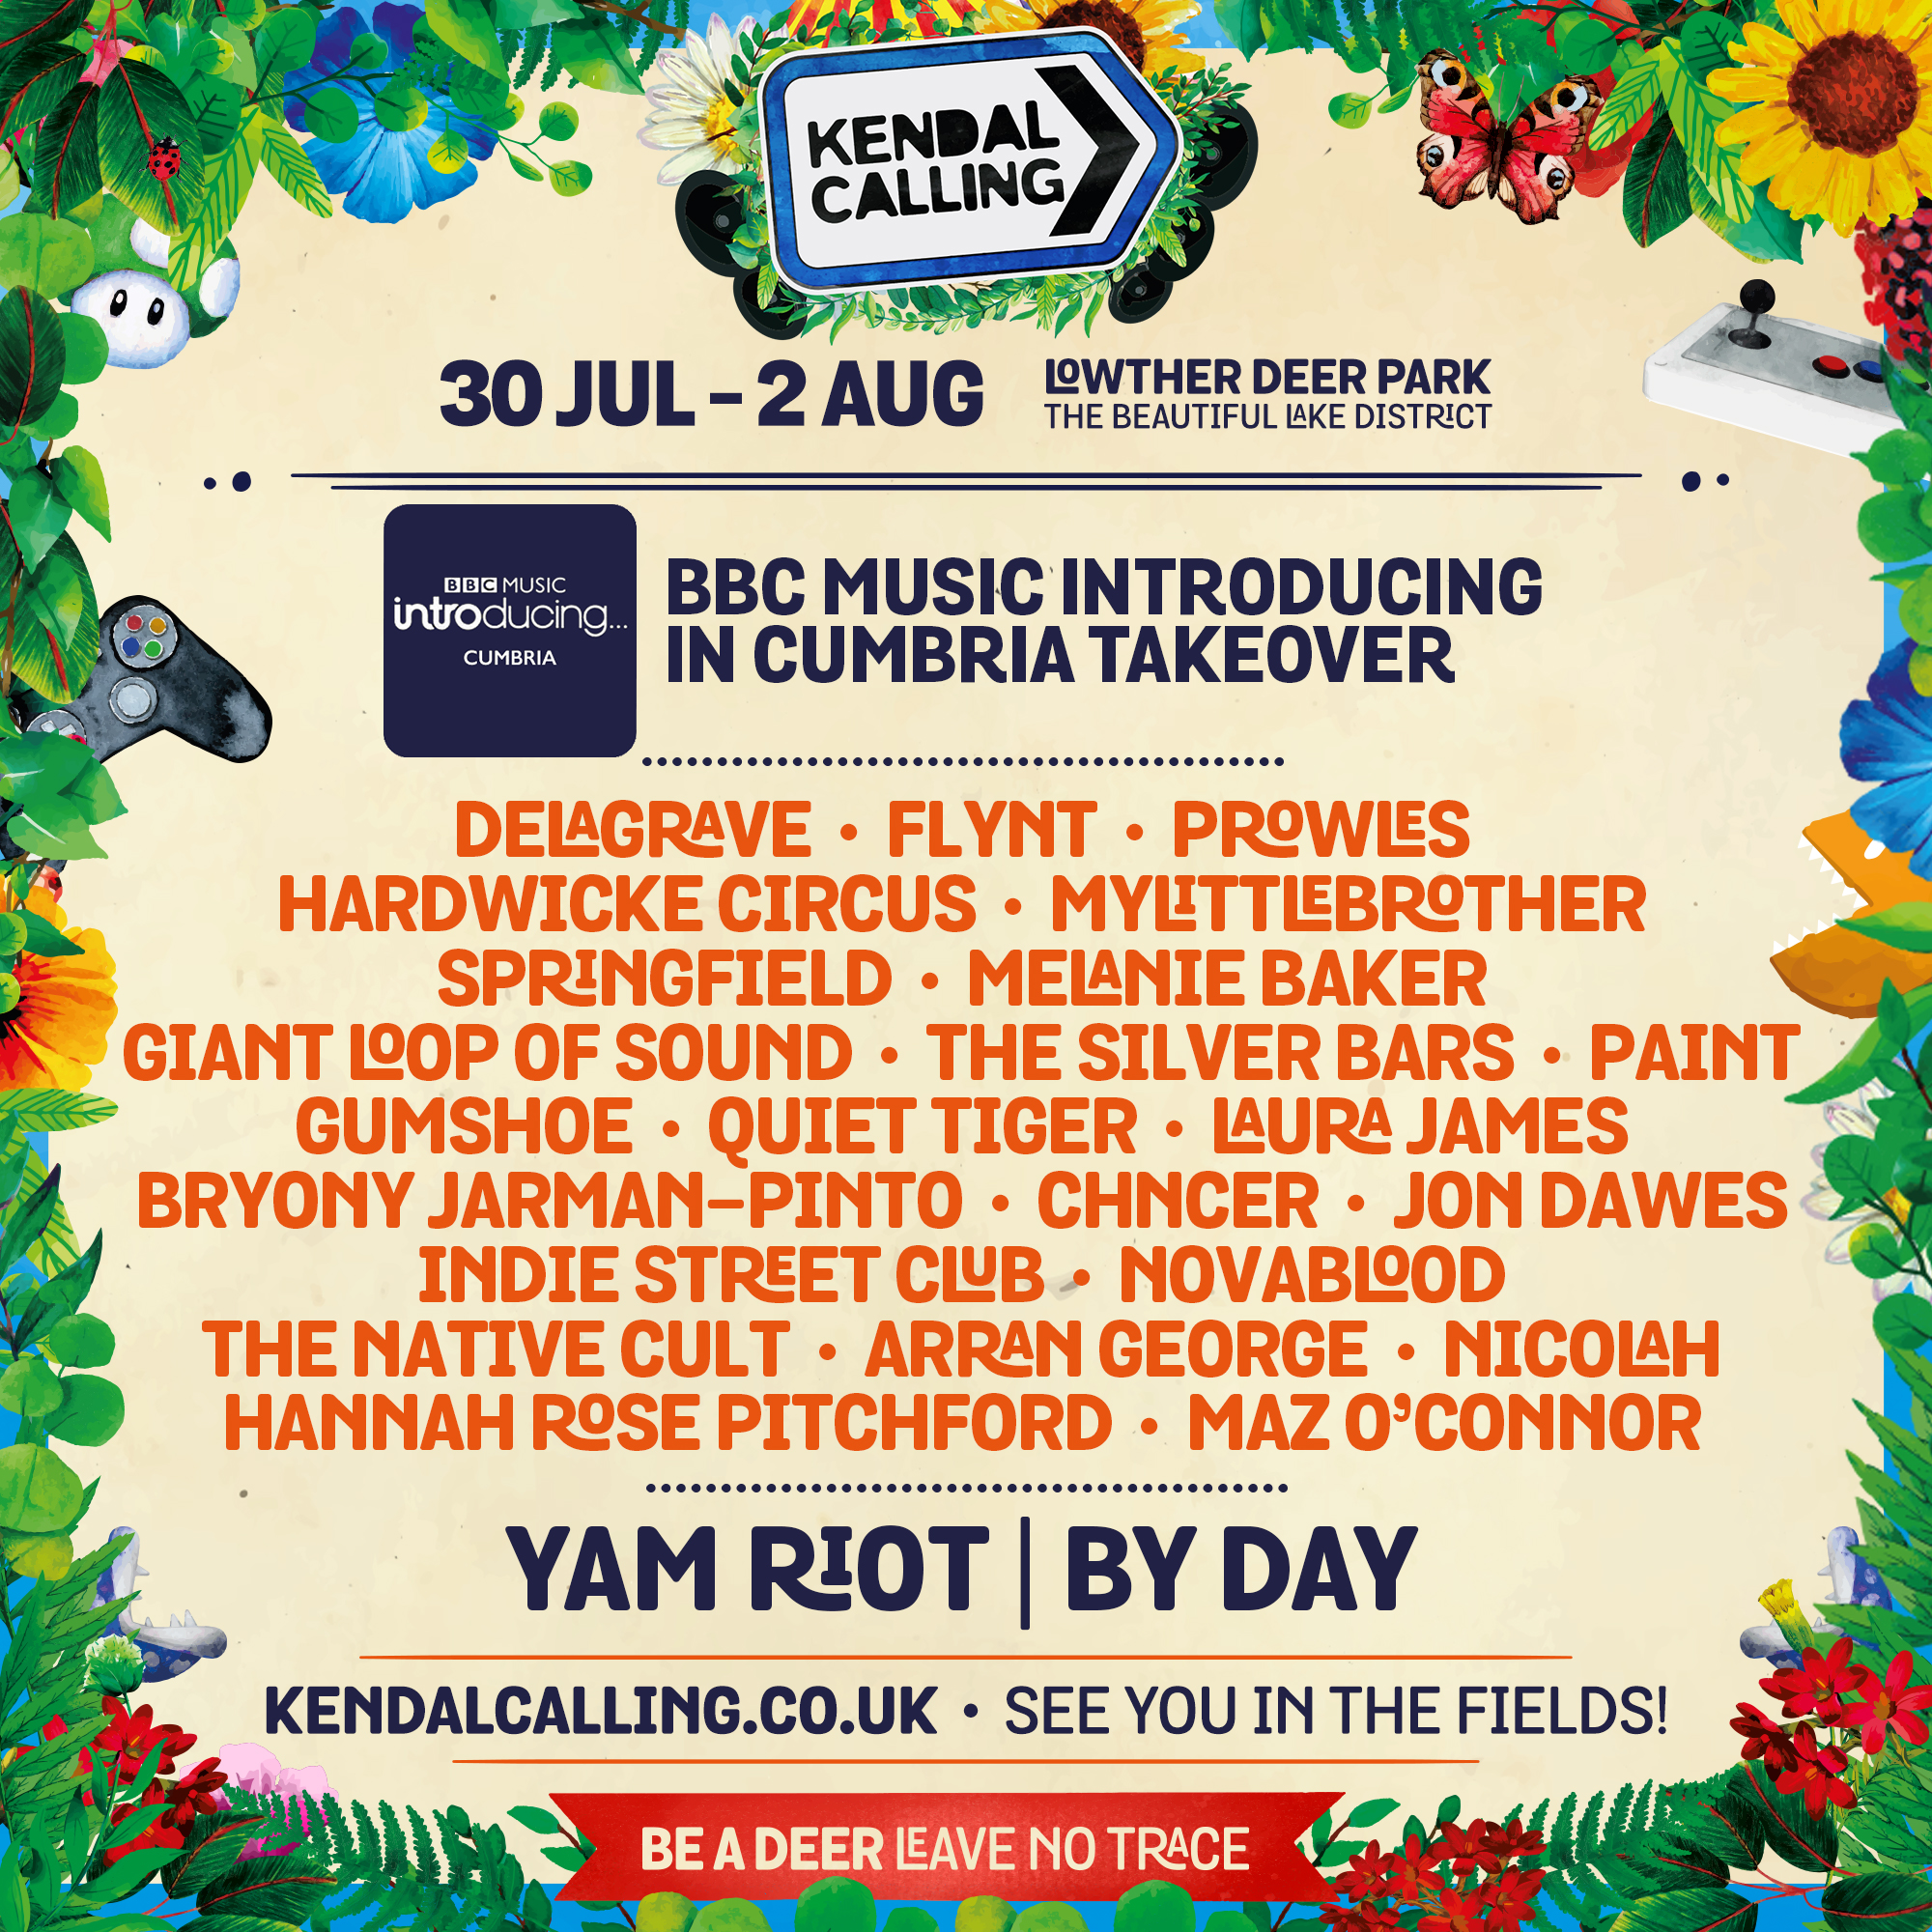 Kendal Calling (Yam Riot stage BBC Music Introducing takeover)